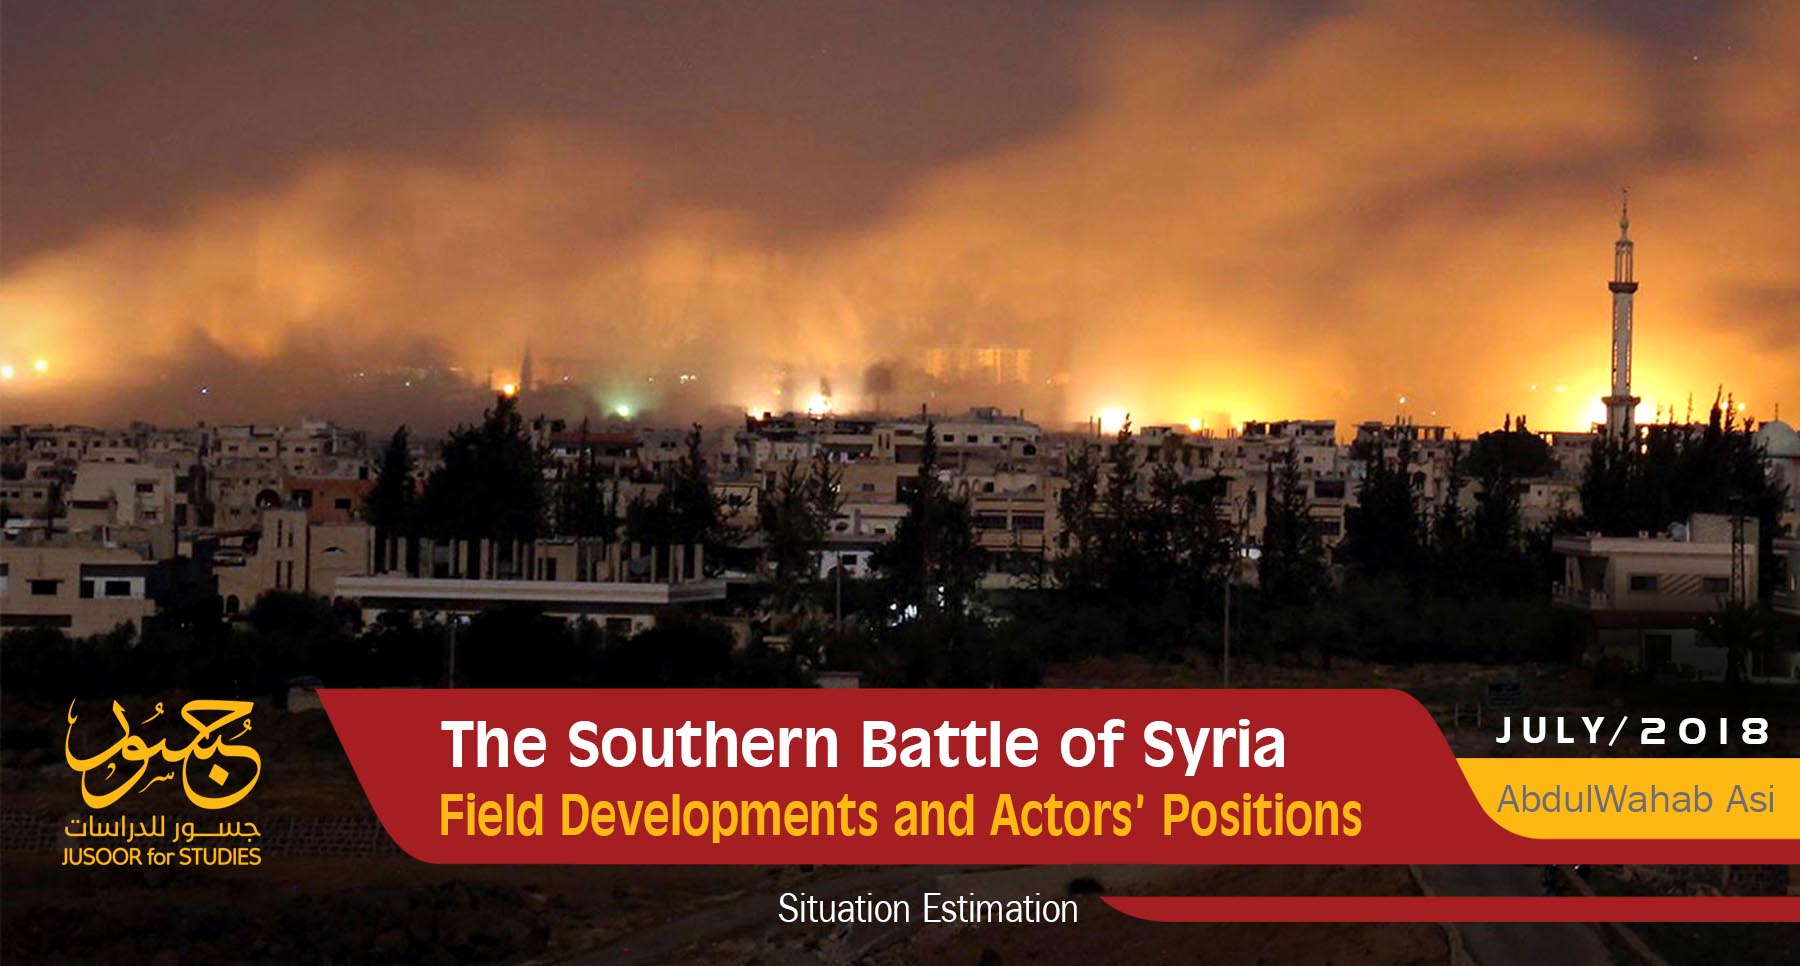  The Southern Battle of Syria Field Developments and Actors’ Positions